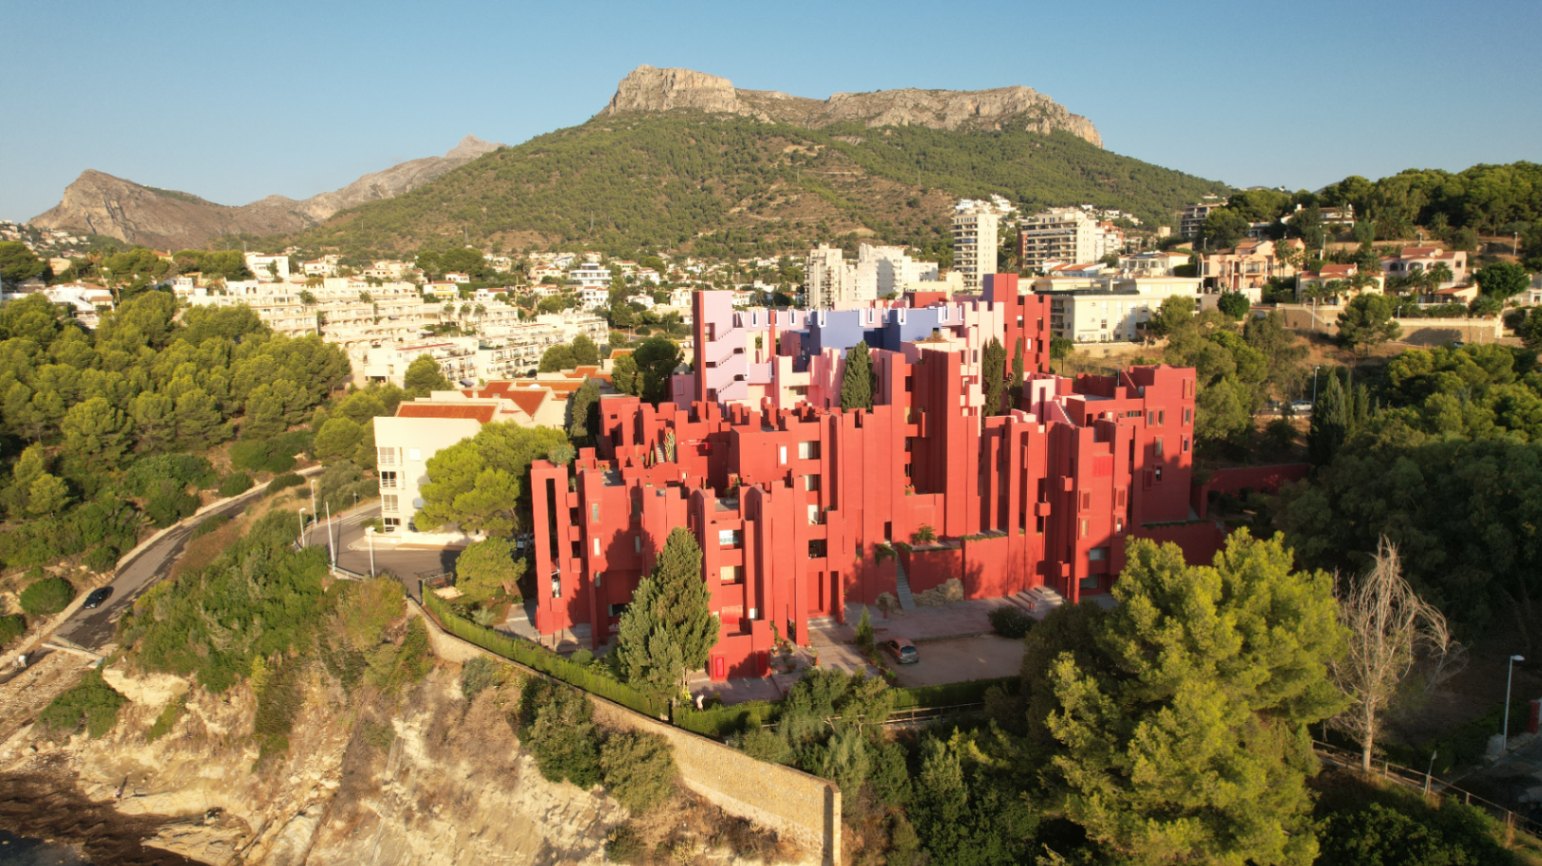 APARTMENT FOR SALE IN THE FAMOUS RED WALL BUILDING DESIGNED BY RICARDO BOFILL